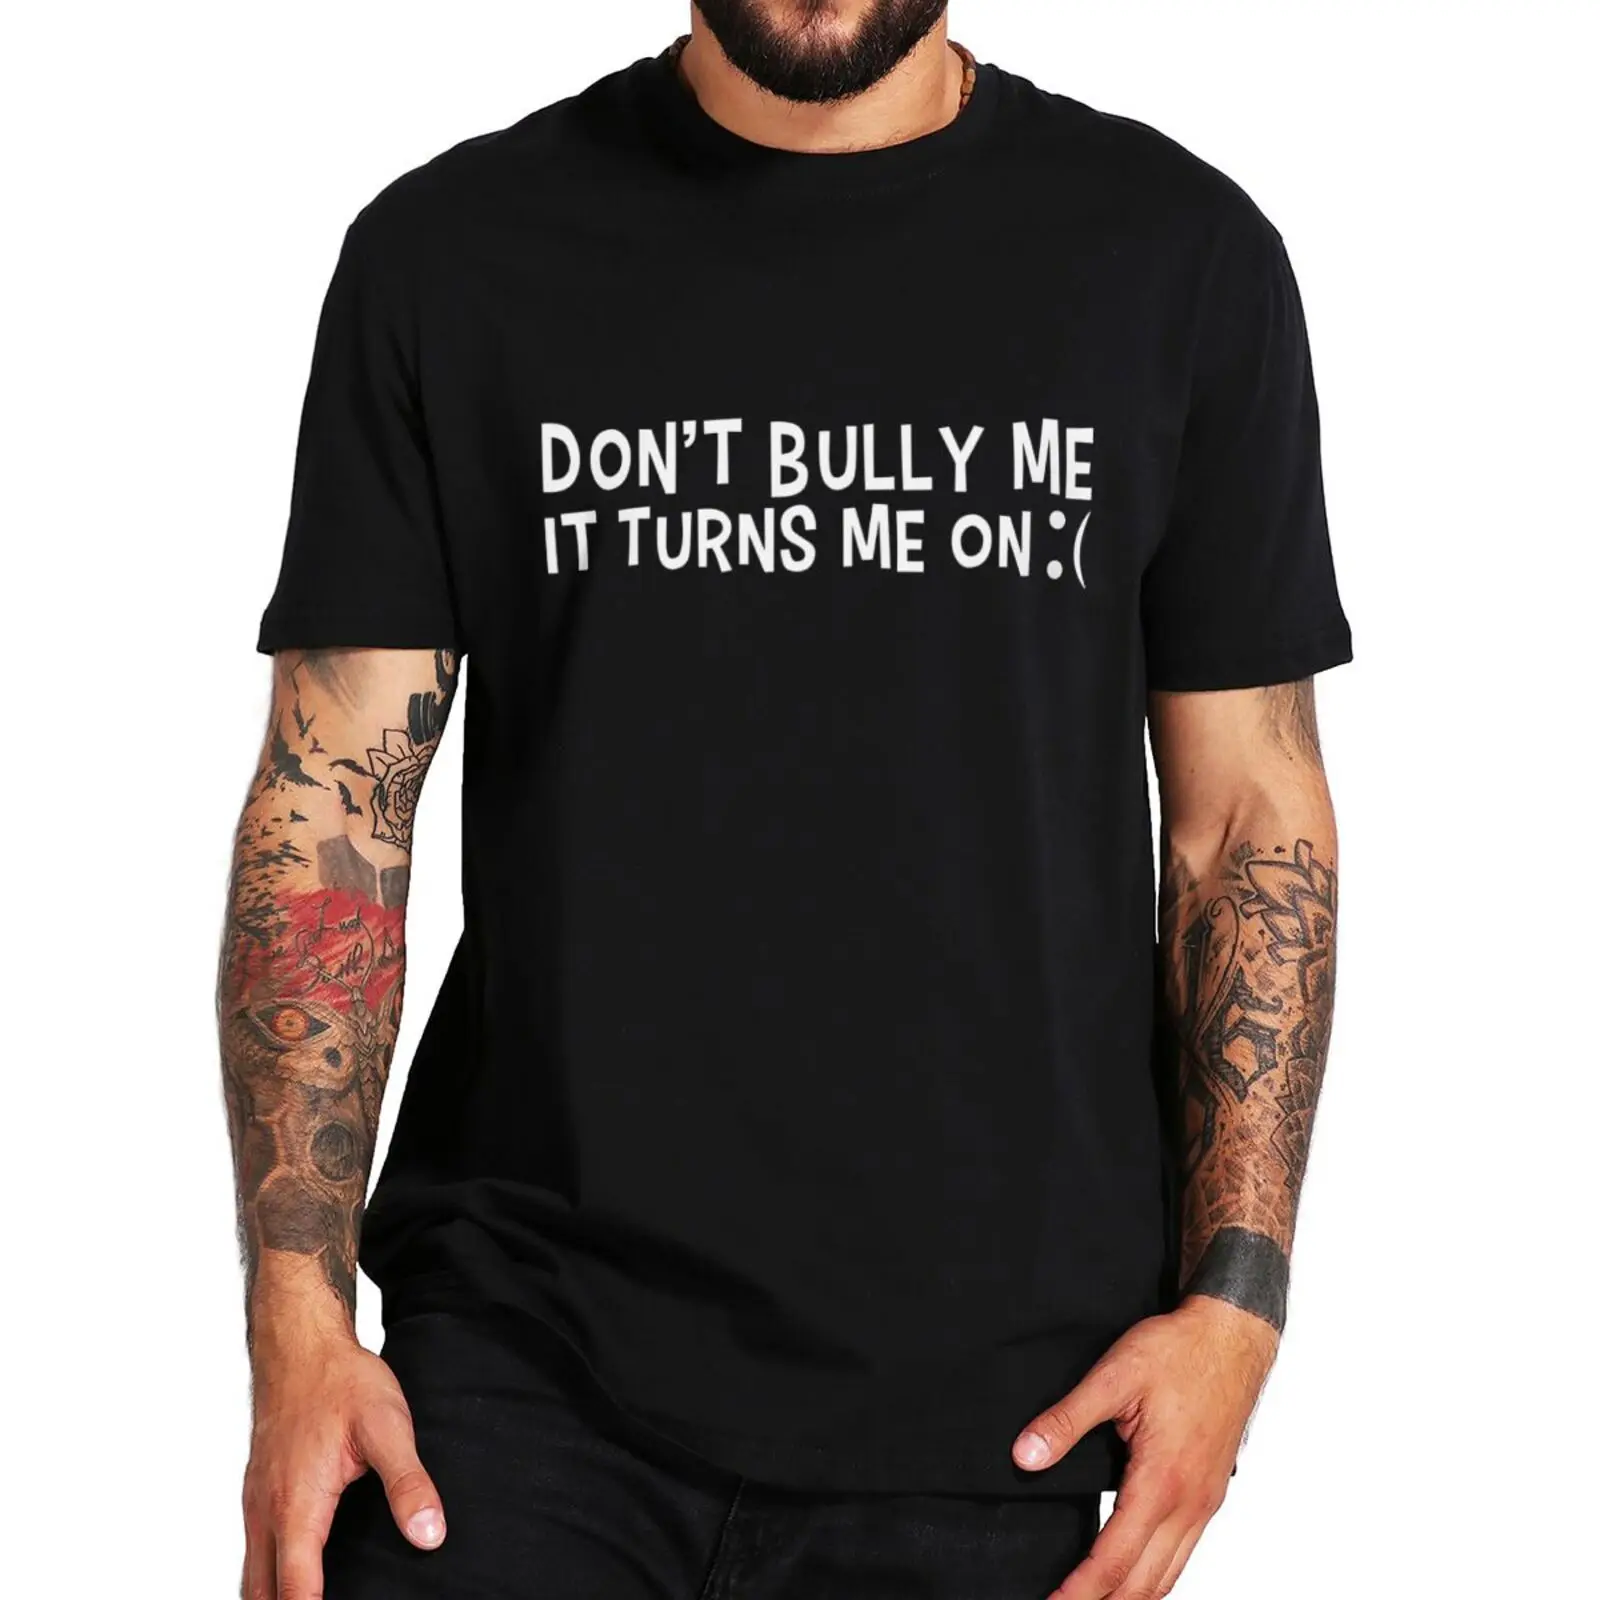 

Don't Bully Me It Turns Me On T-Shirt Funny Adult Humor Jokes Meme Hipster Tee Summer Cotton Unisex Casual T Shirts EU Size